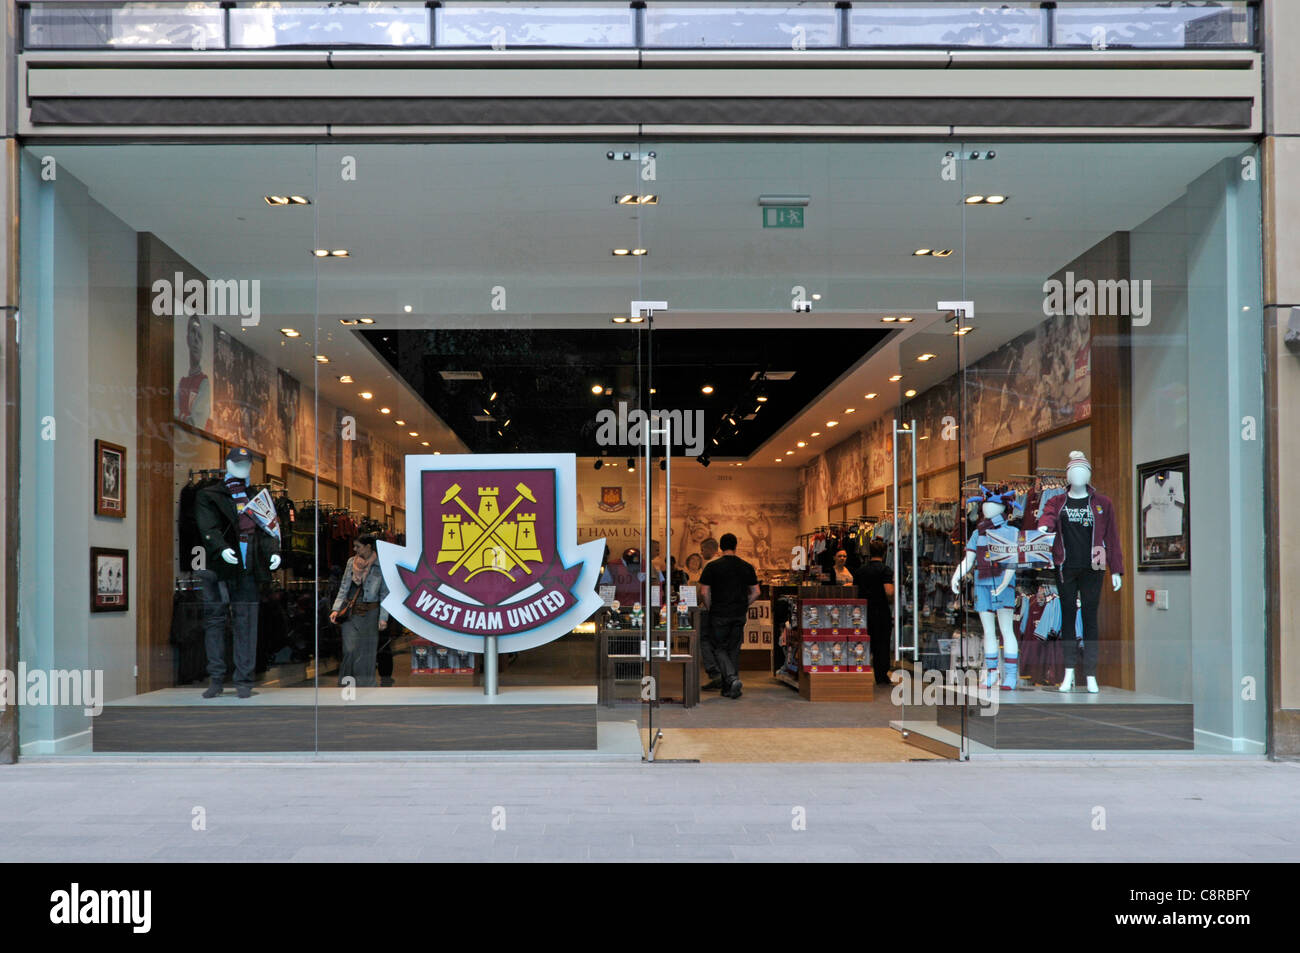 West Ham Football Club store shopfront in an outdoor shopping mall ...